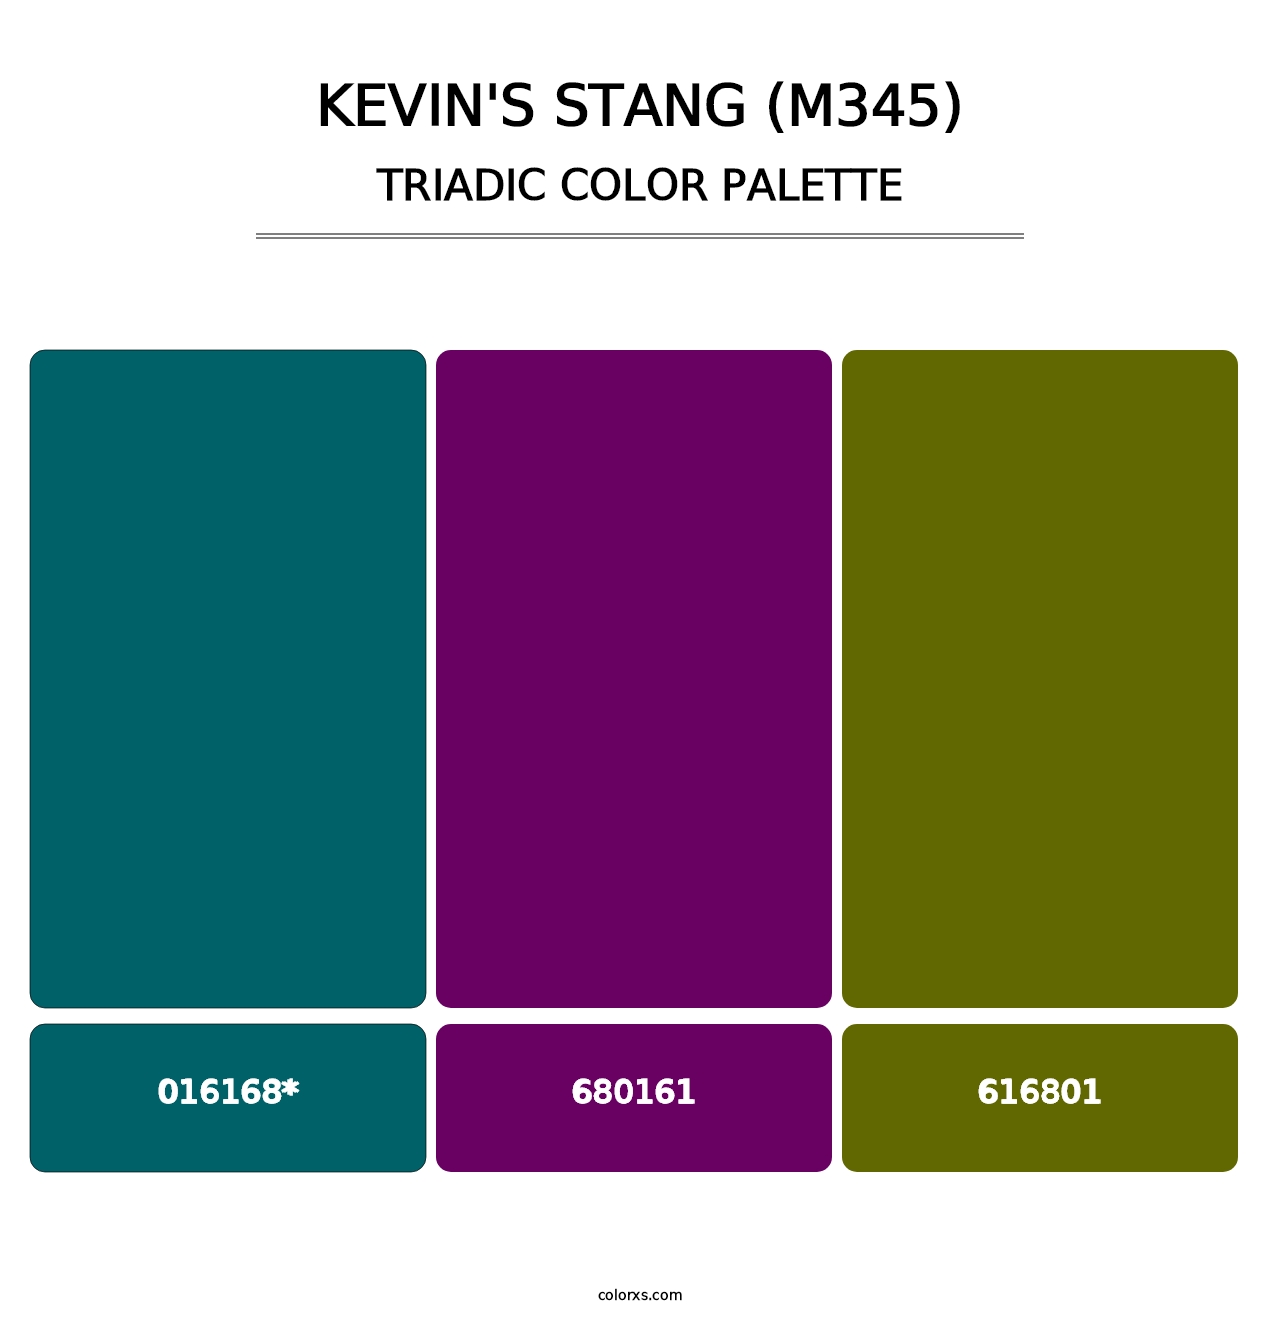 Kevin's Stang (M345) - Triadic Color Palette